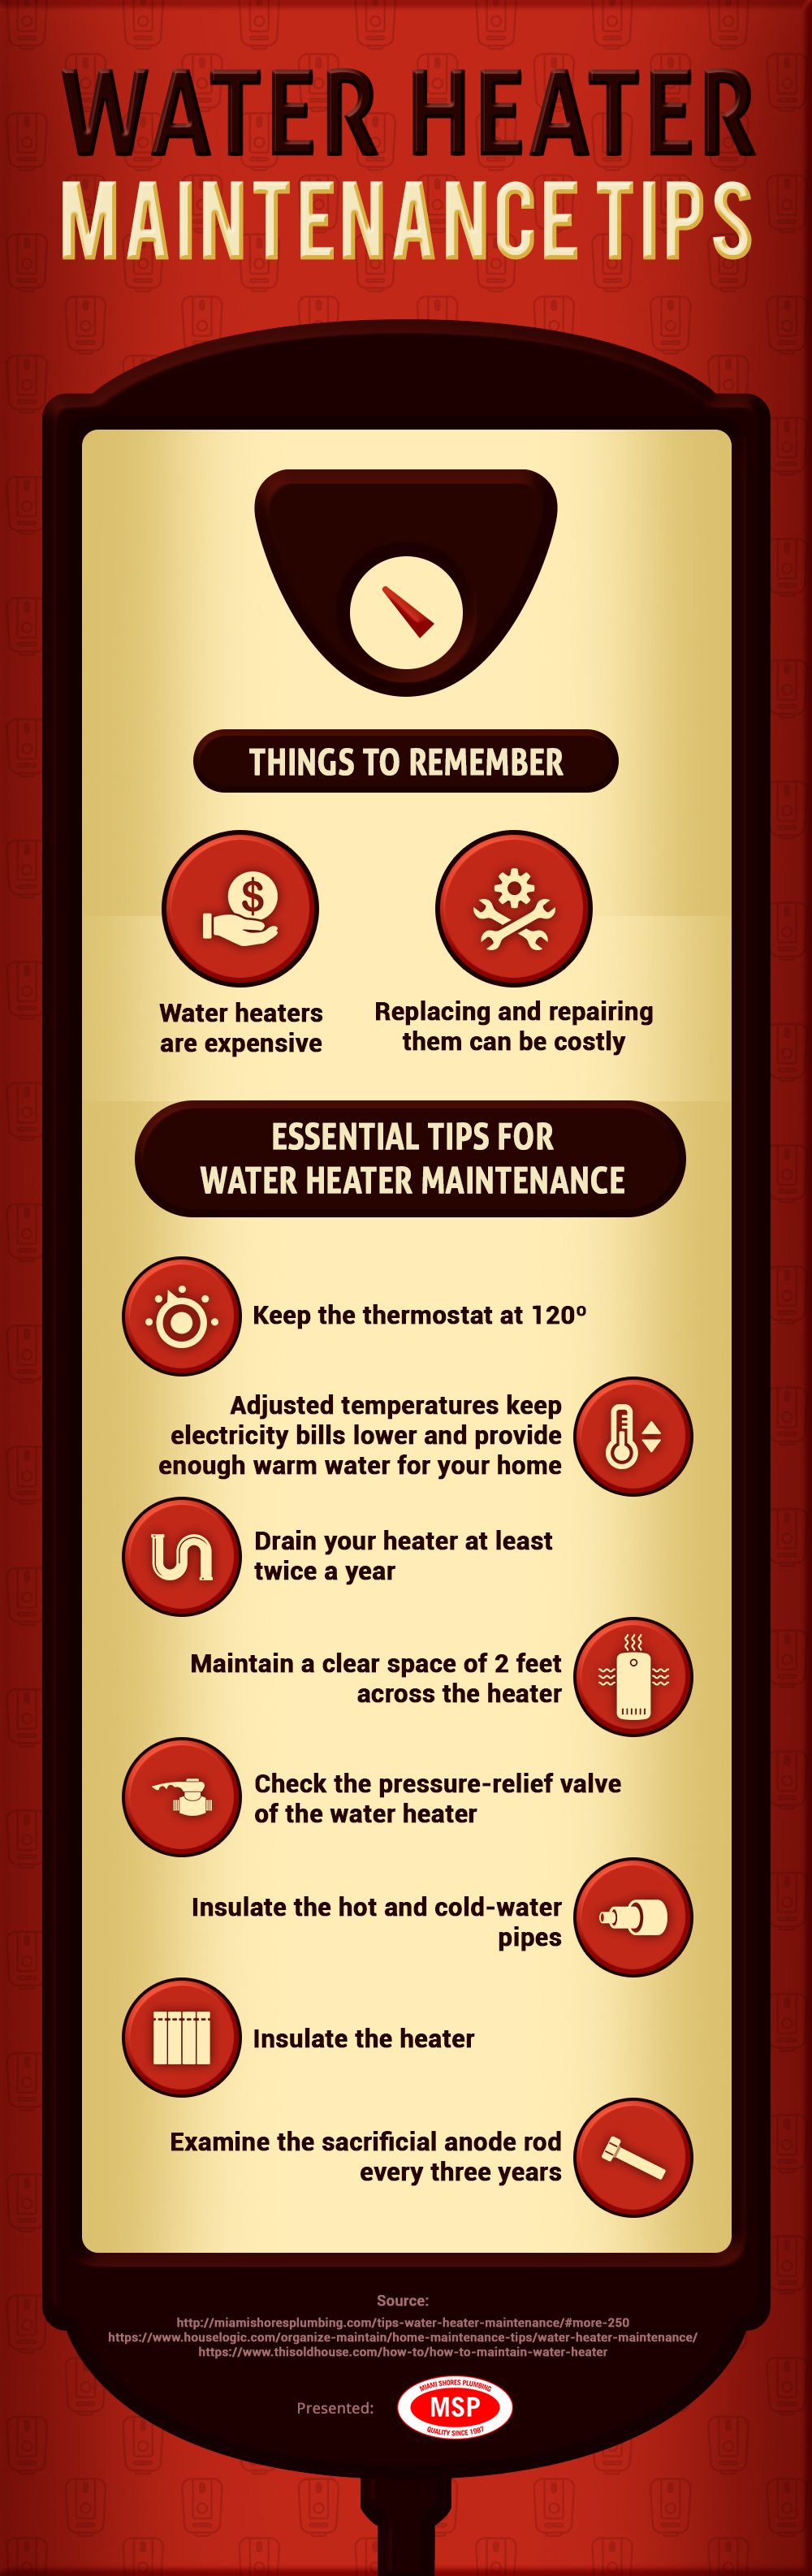 Infographic for Water Heater Maintenance Tips 